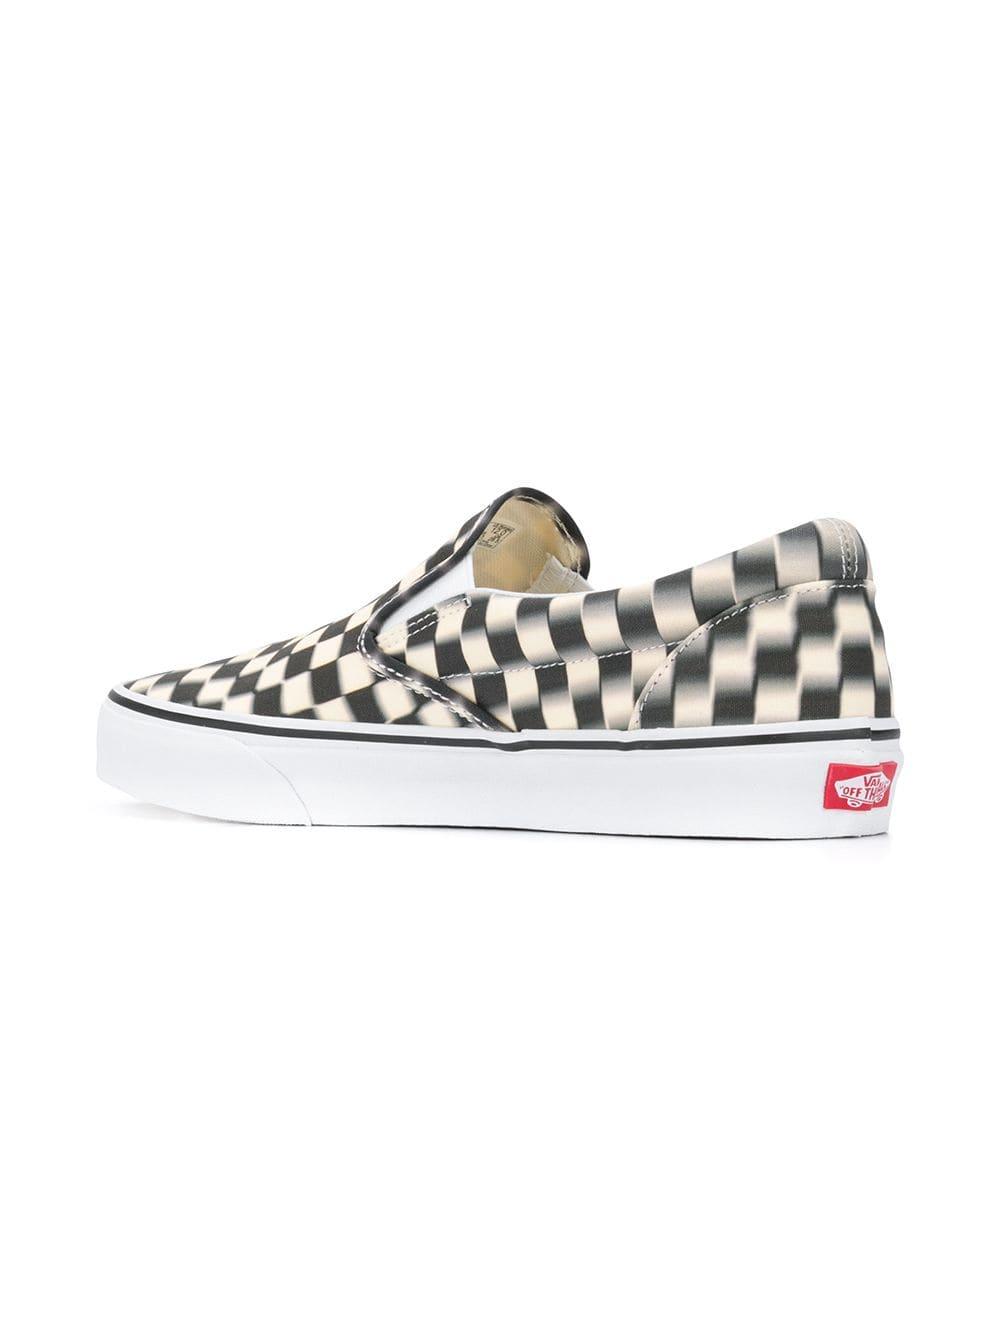 Vans Canvas Classic Blur Check Slip On Sneakers in Black for Men | Lyst